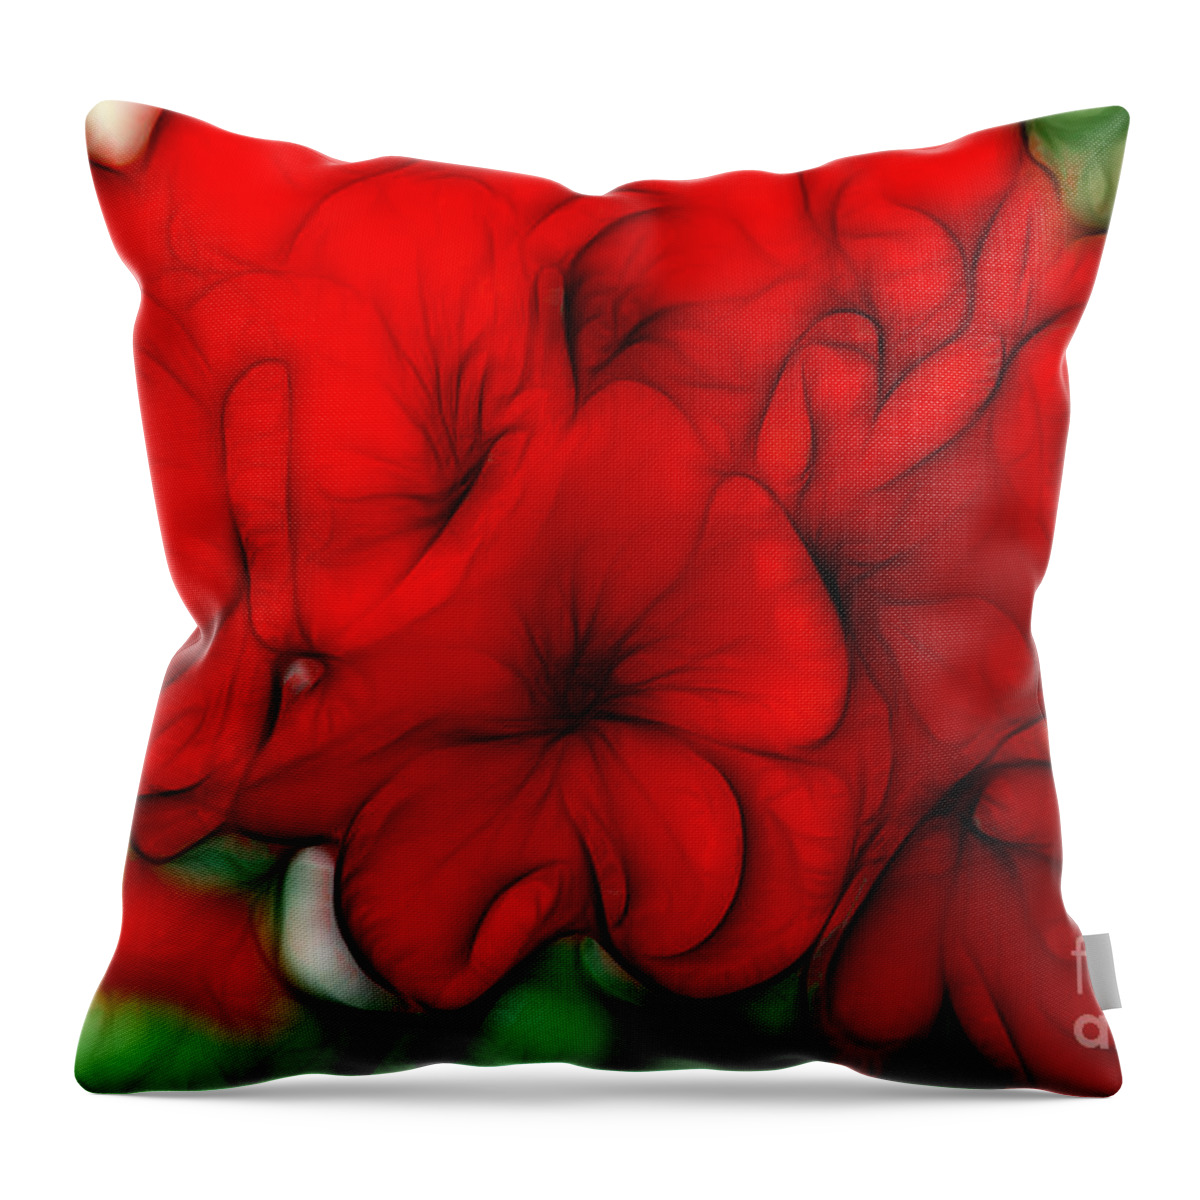 Red Throw Pillow featuring the digital art Red Geranium by Jayne Carney